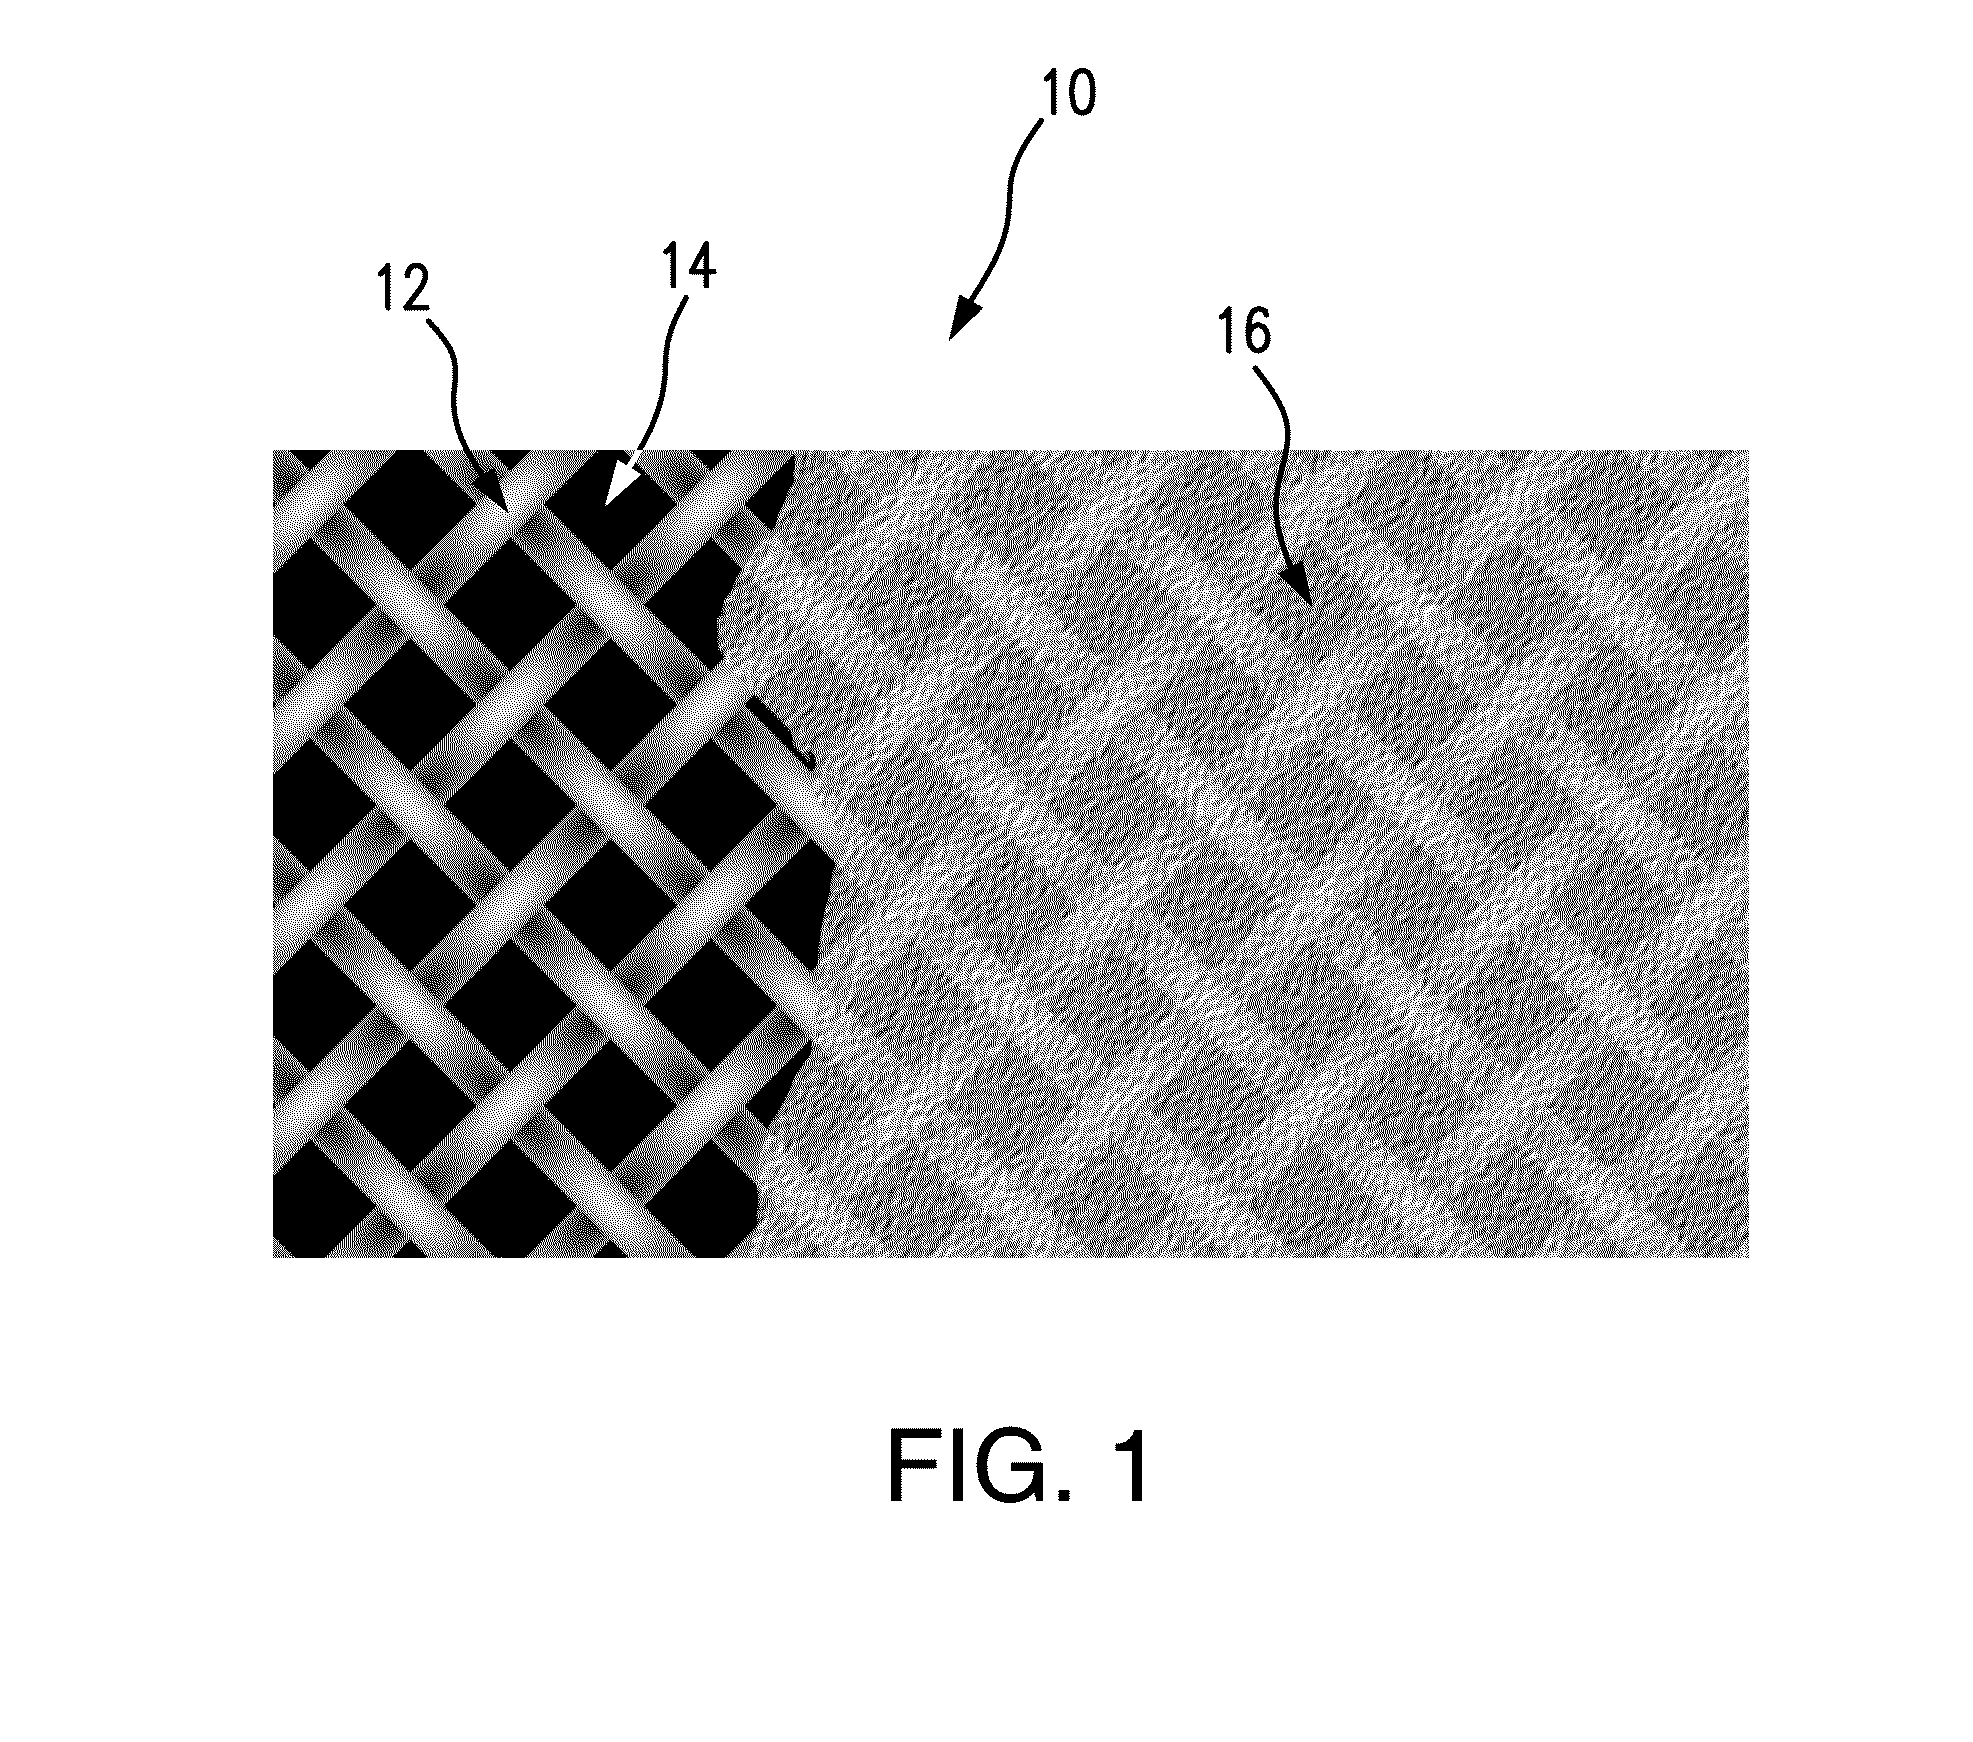 Surgical sutures incorporated with stem cells or other bioactive materials